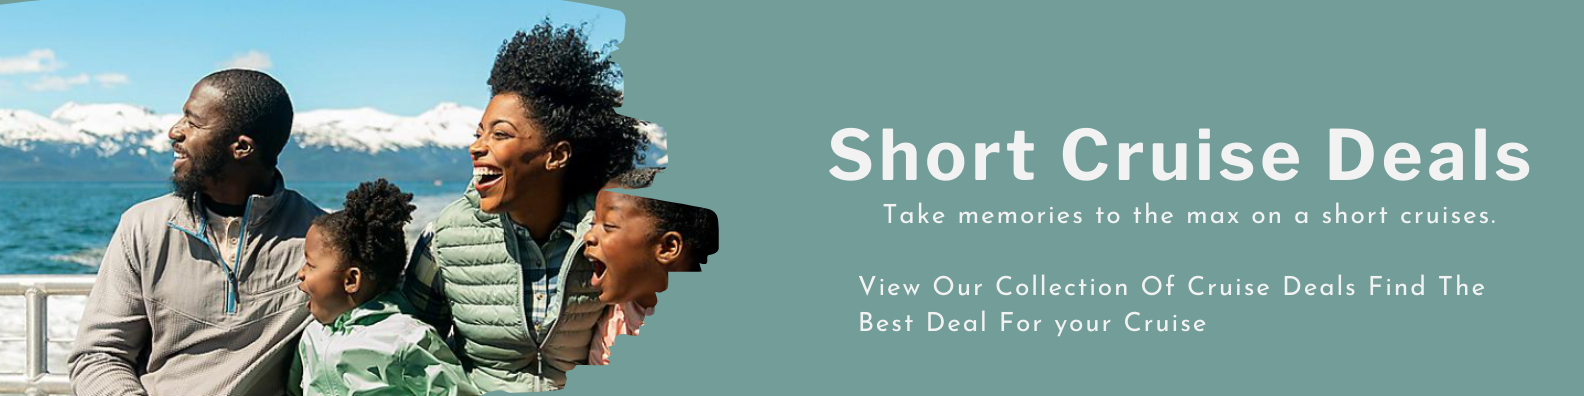 View Our Collection Of Short Getaway Cruise Deals. Find The Best Deal For your Cruise!!!